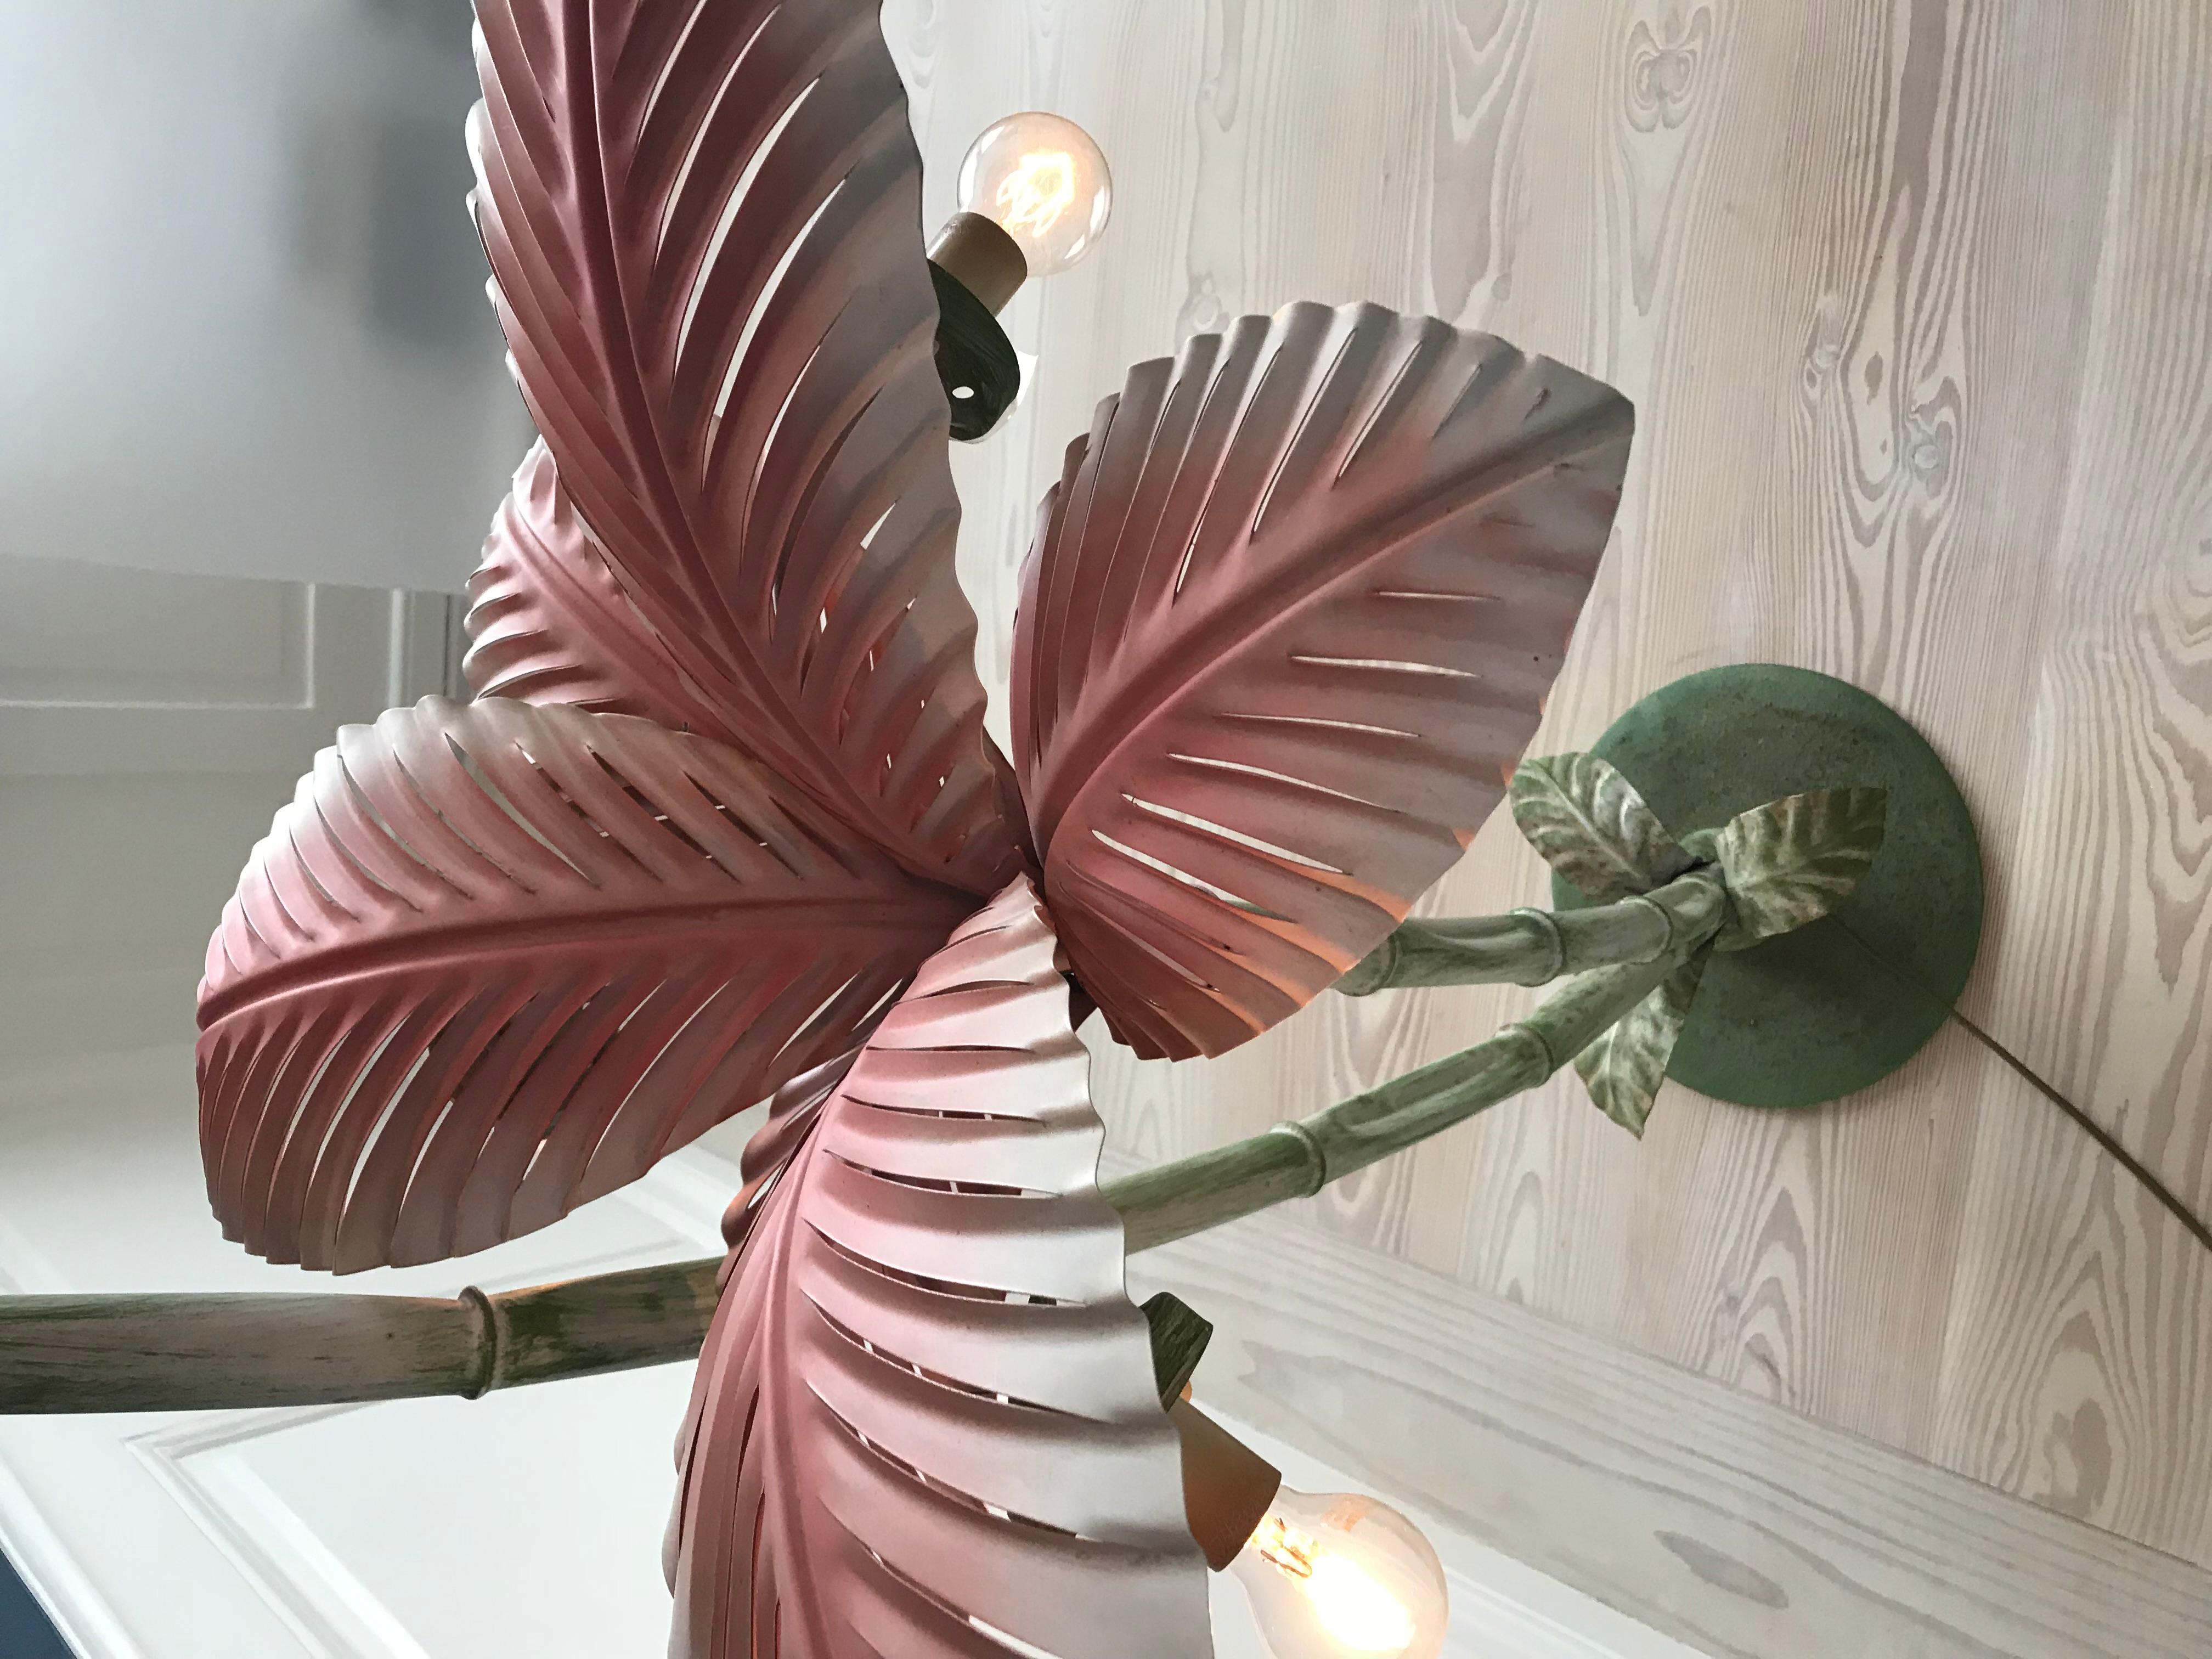 French vintage floor lamp in the shape of a palm tree with pale pink painted metal leaves.